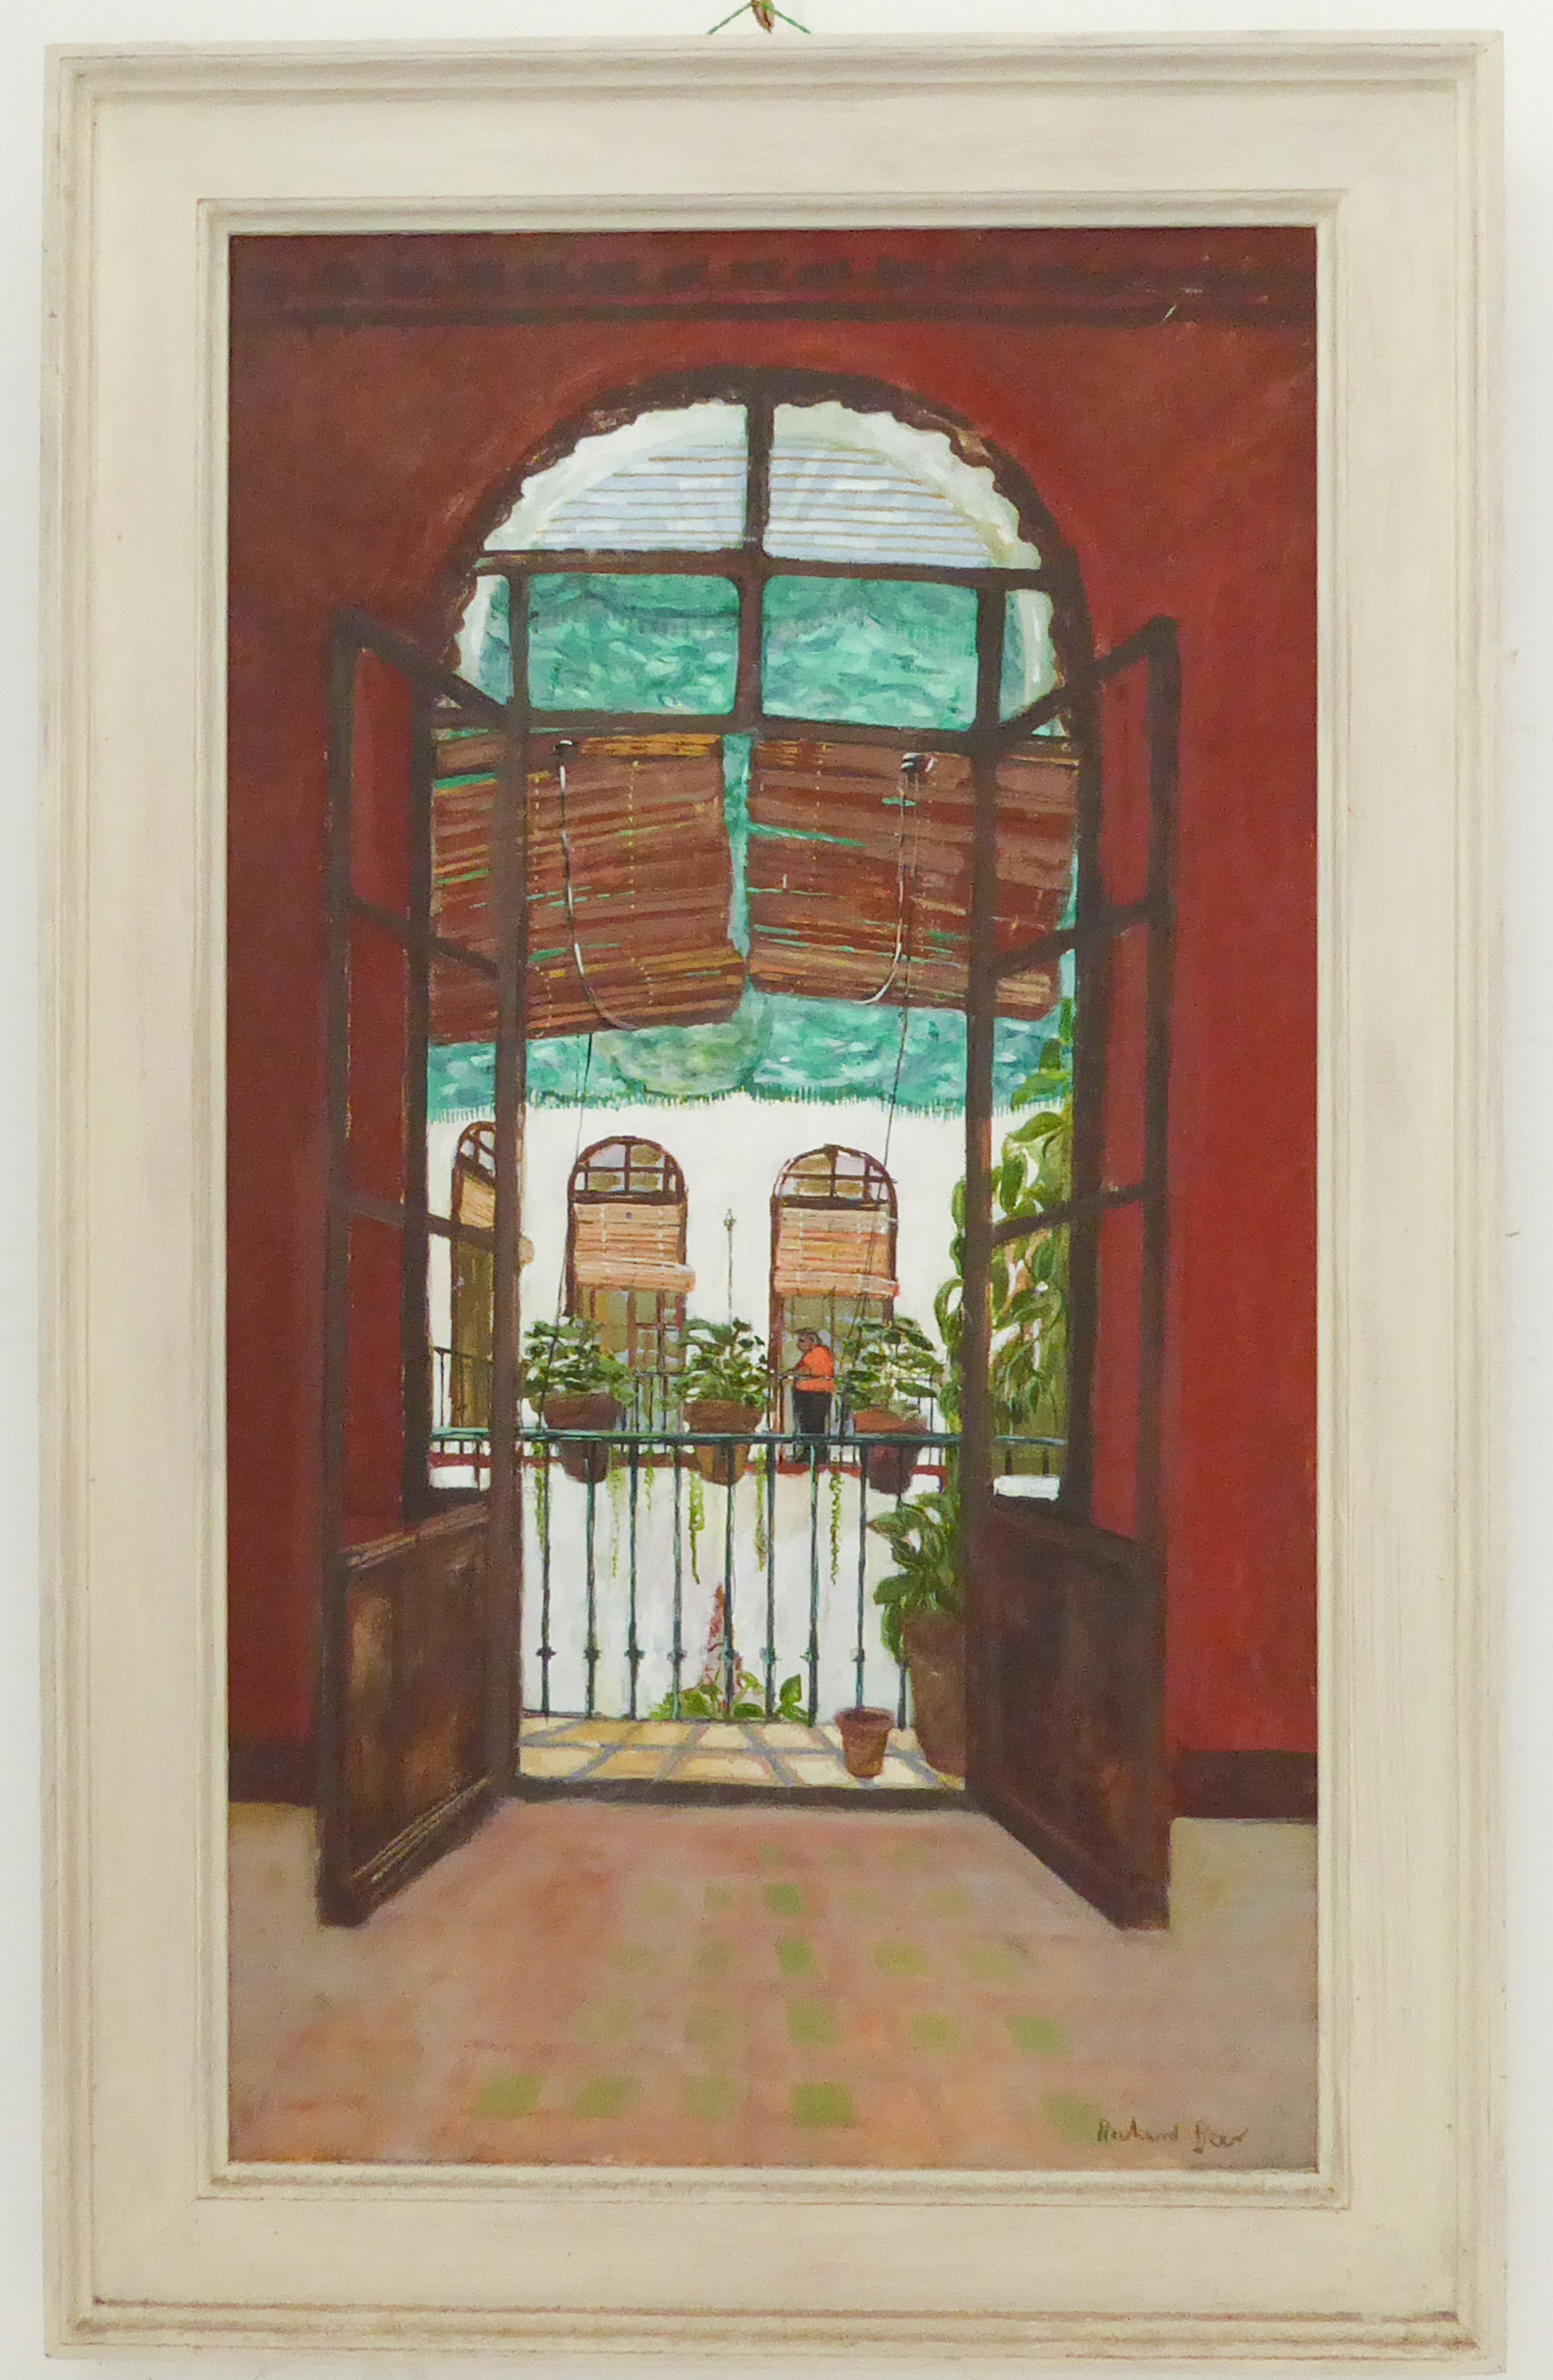 RICHARD BEER (1928-2017) - The Hanging Garden, oil on canvas, signed lower right (42 x 24 in (107